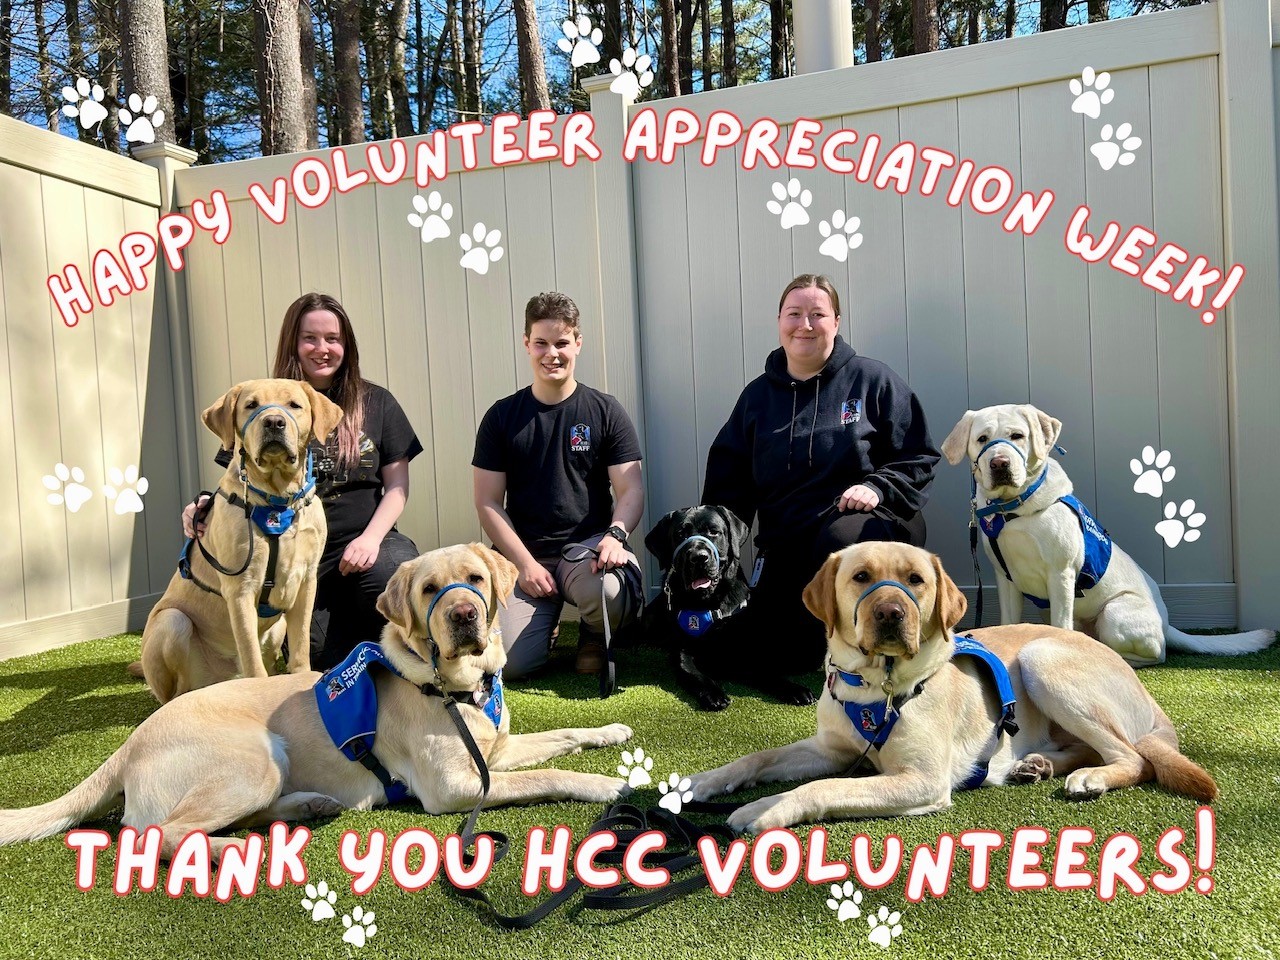 THANK YOU to our Canine Center volunteers. You take such good care of our dogs, and we so appreciate you!